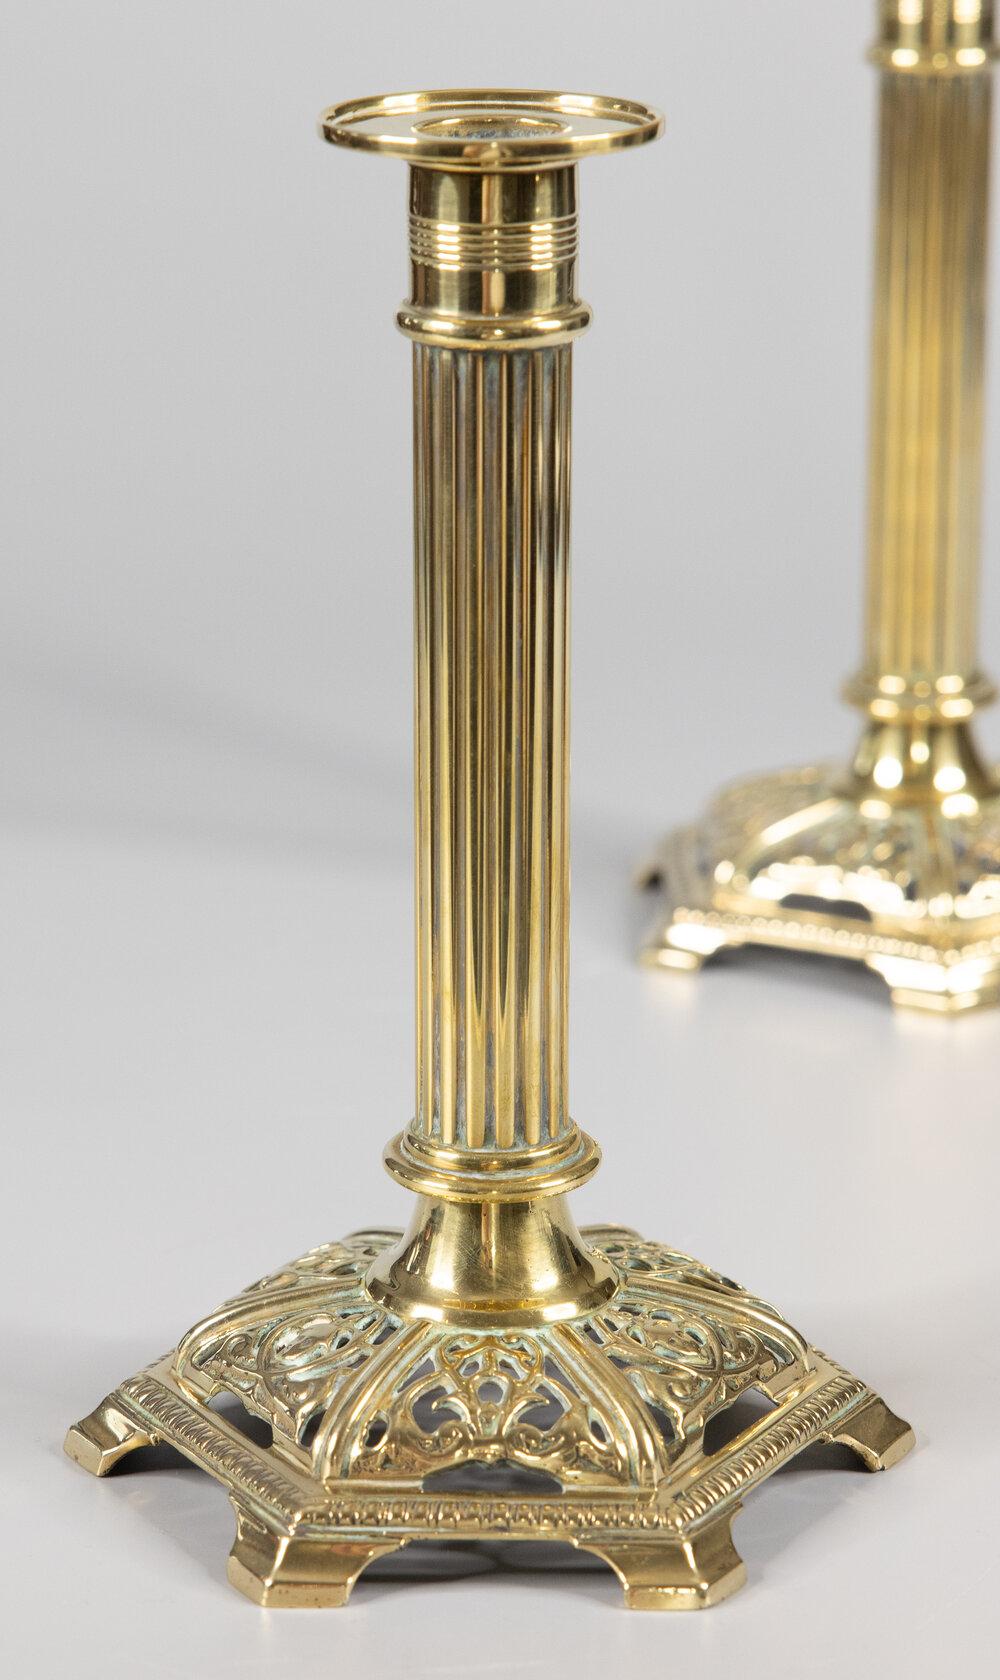 A fine pair of English Neoclassical style cast brass candlesticks, circa 1890. No maker's mark. These handsome candlesticks are well cast and heavy with stately reeded columns and ornate bases. They are a nice large size at 9